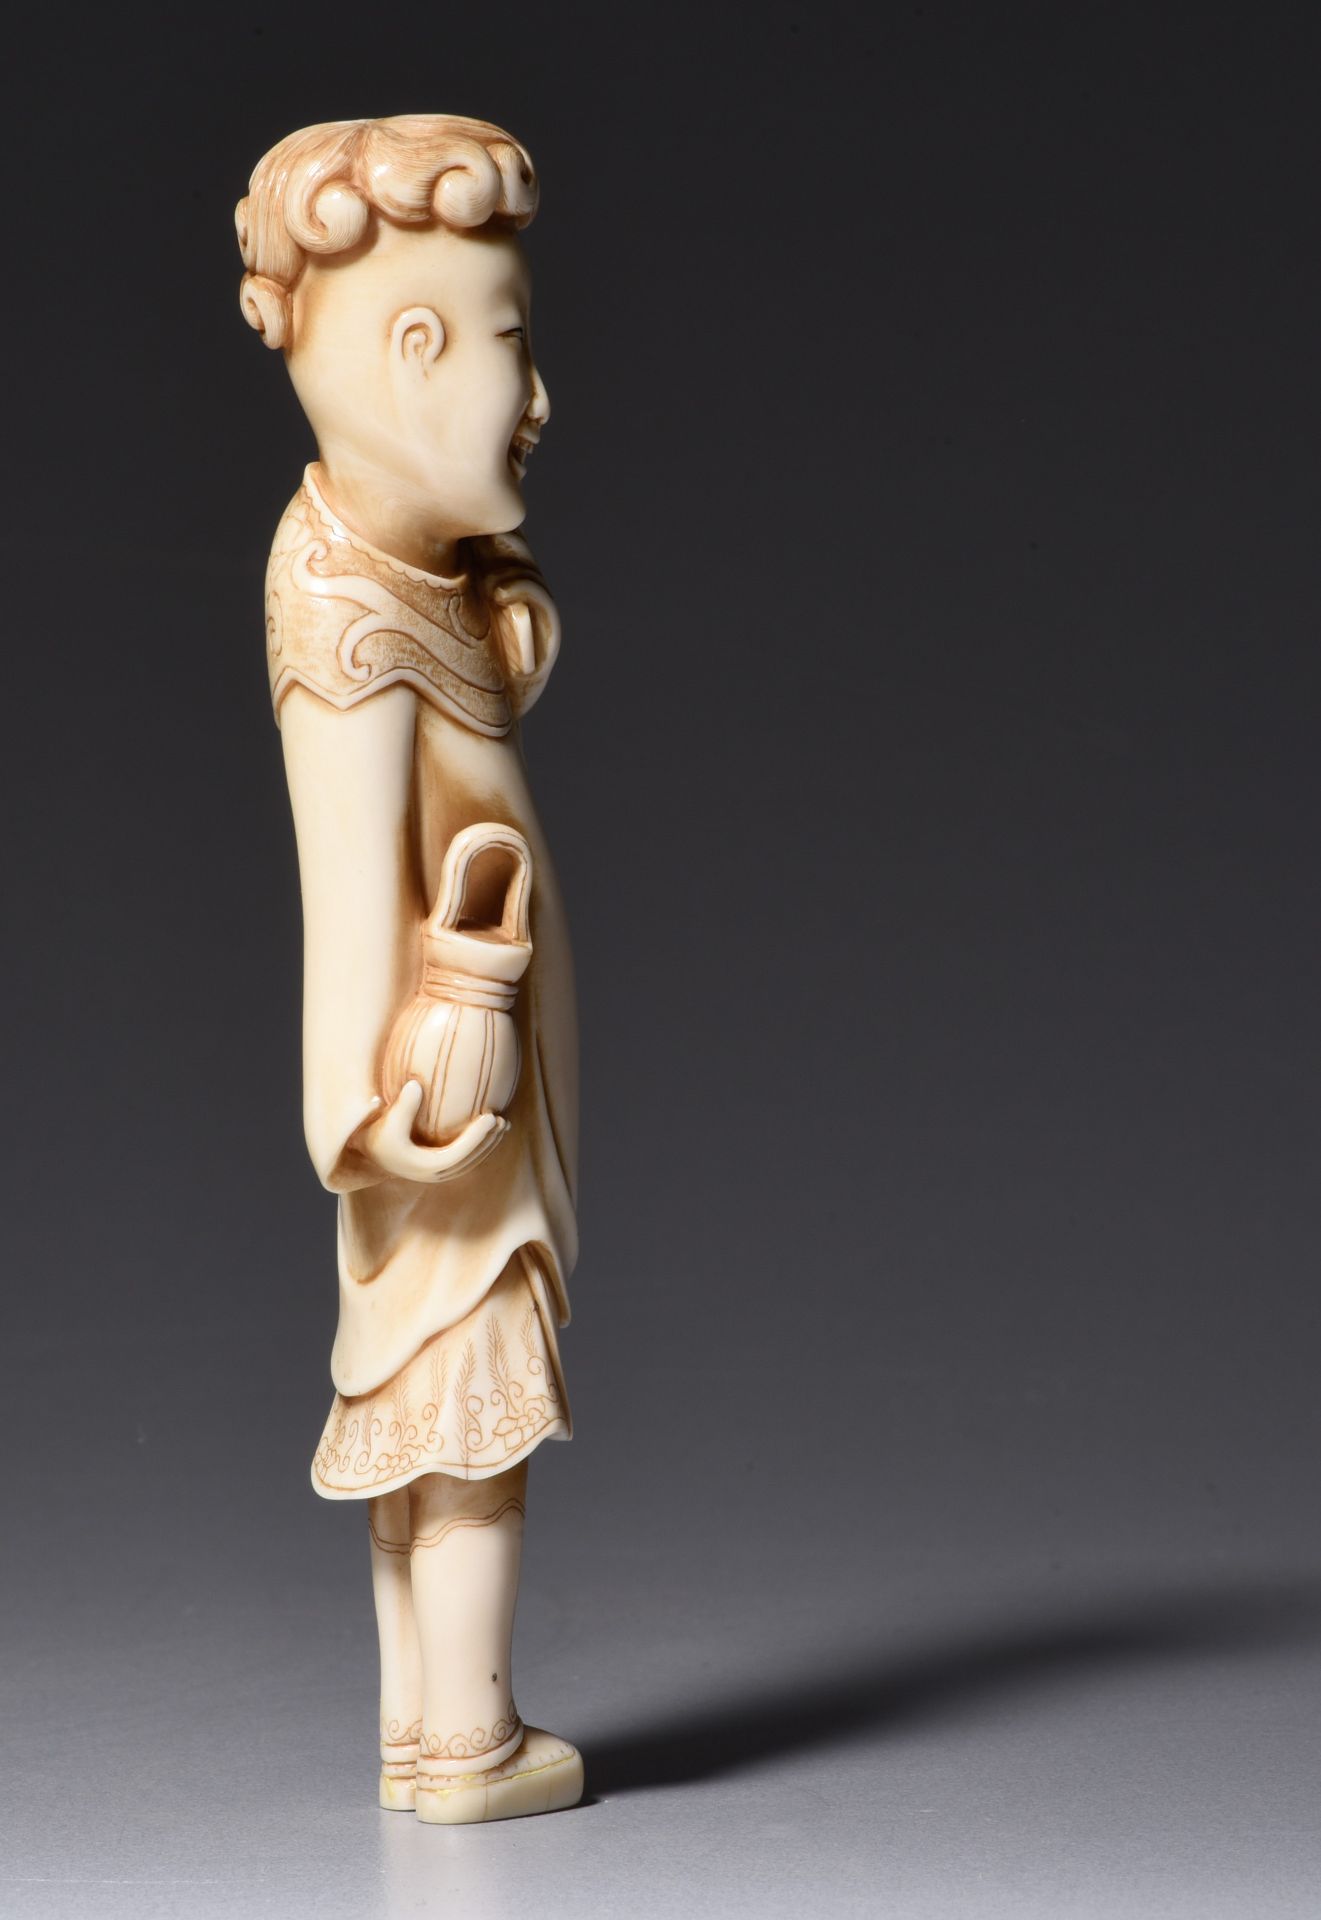 A Chinese ivory figure sculpted in Ming style, 19th century, H 14,2 cm, 79 g (+) - Image 3 of 6